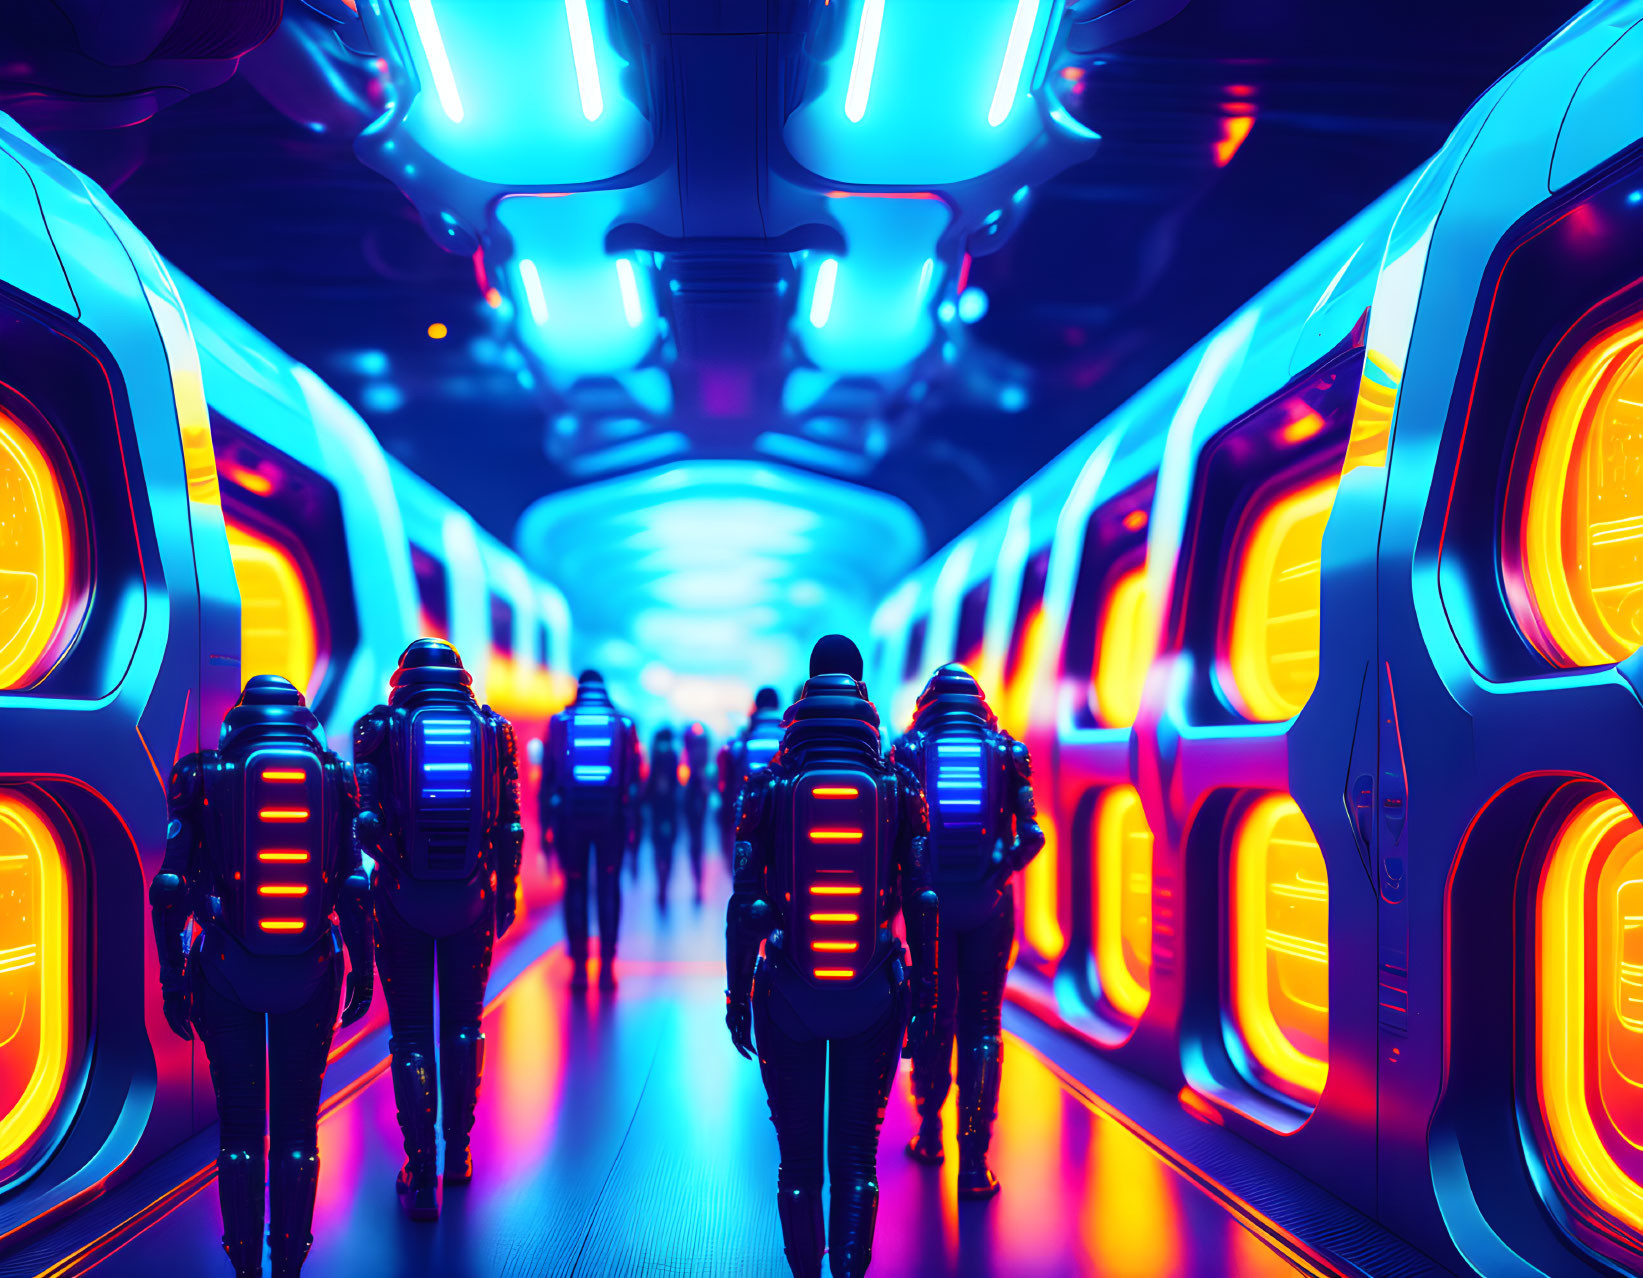 Futuristic neon-lit corridor with high-tech walls and ceiling